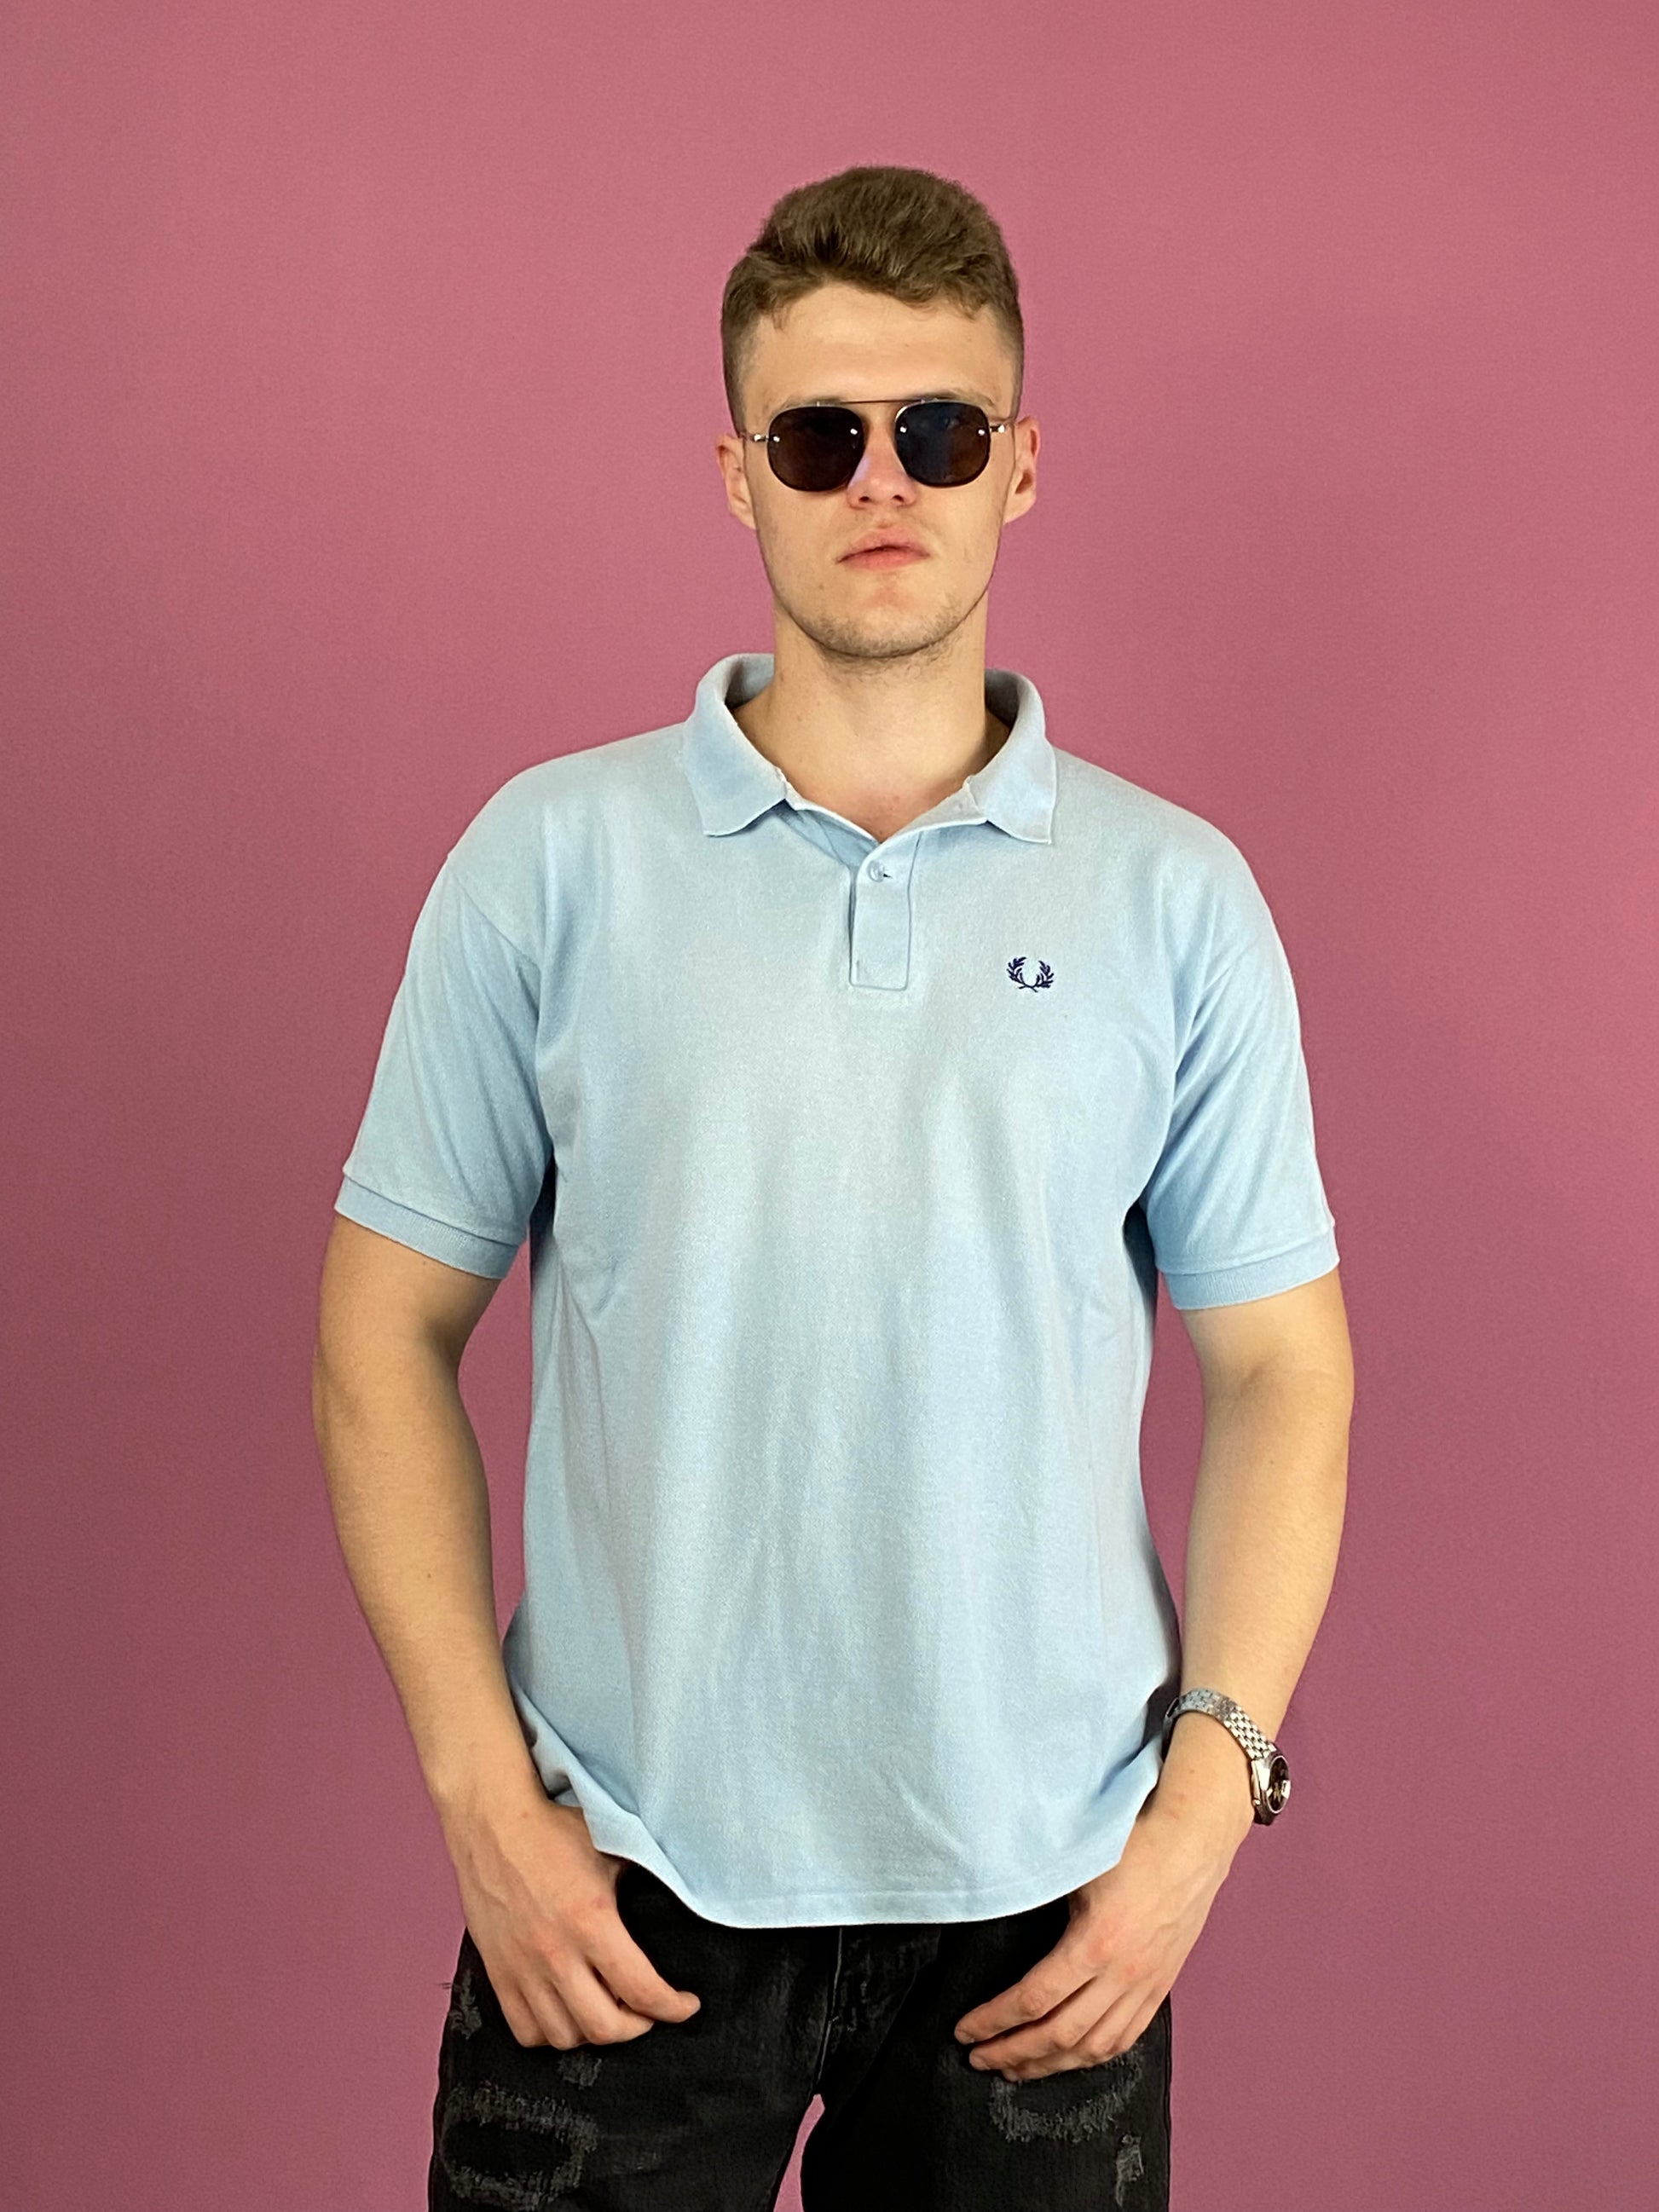 90s Fred Perry Vintage Men's Polo Shirt - Large Blue Cotton